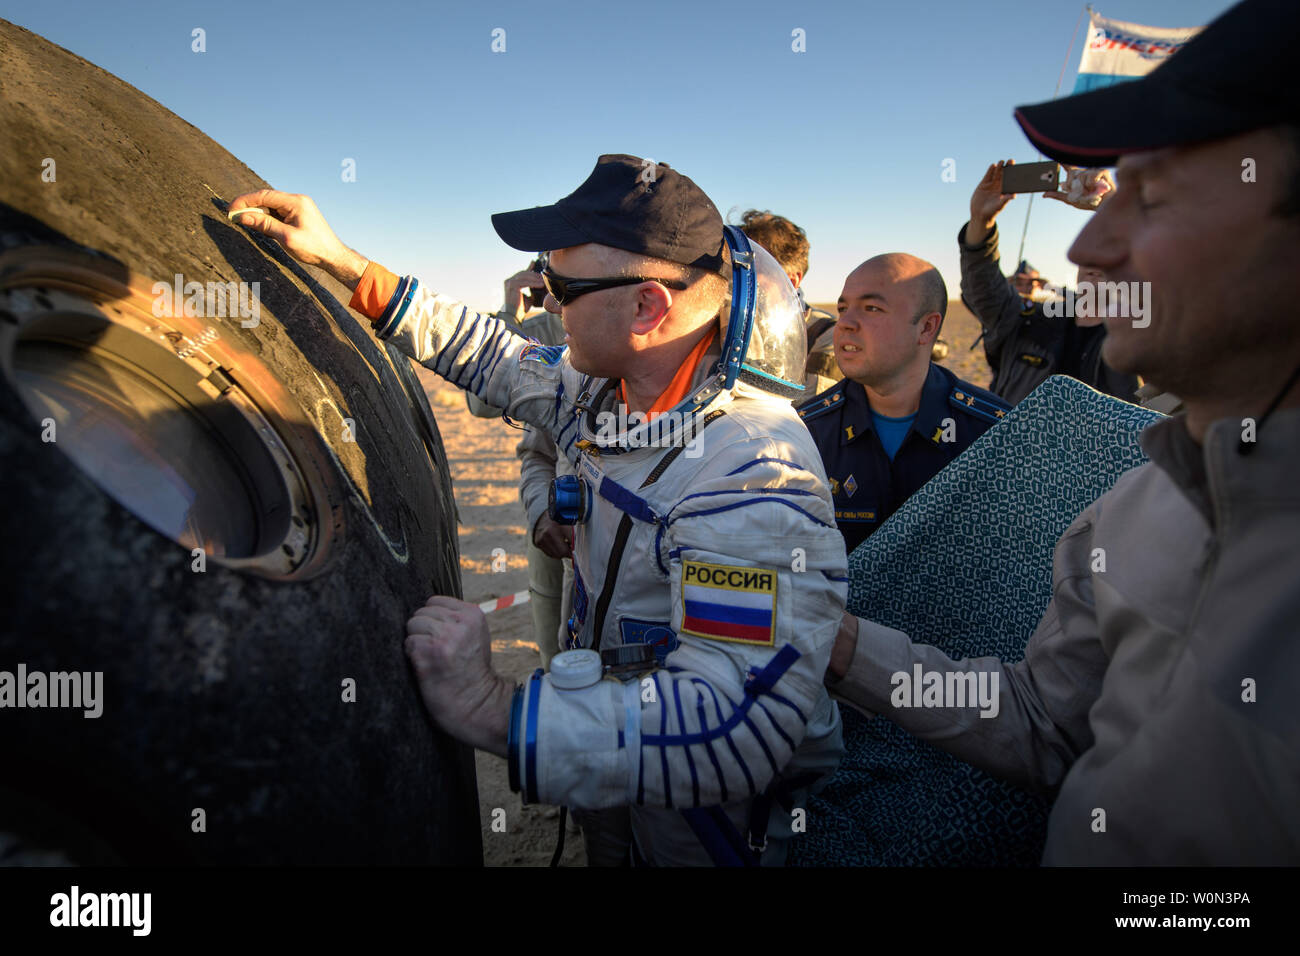 Expedition 56 Flight Engineer and Soyuz Commander Oleg Artemyev of Roscosmos signs the outside of the Soyuz MS-08 spacecraft just minutes after he, Expedition 56 Commander Drew Feustel of NASA, and Flight Engineer Ricky Arnold of NASA, landed in a remote area near the town of Zhezkazgan, Kazakhstan on October 4, 2018. Feustel, Arnold, and Artemyev are returning after 197 days in space where they served as members of the Expedition 55 and 56 crews onboard the International Space Station. NASA Photo by Bill Ingalls/UPI Stock Photo